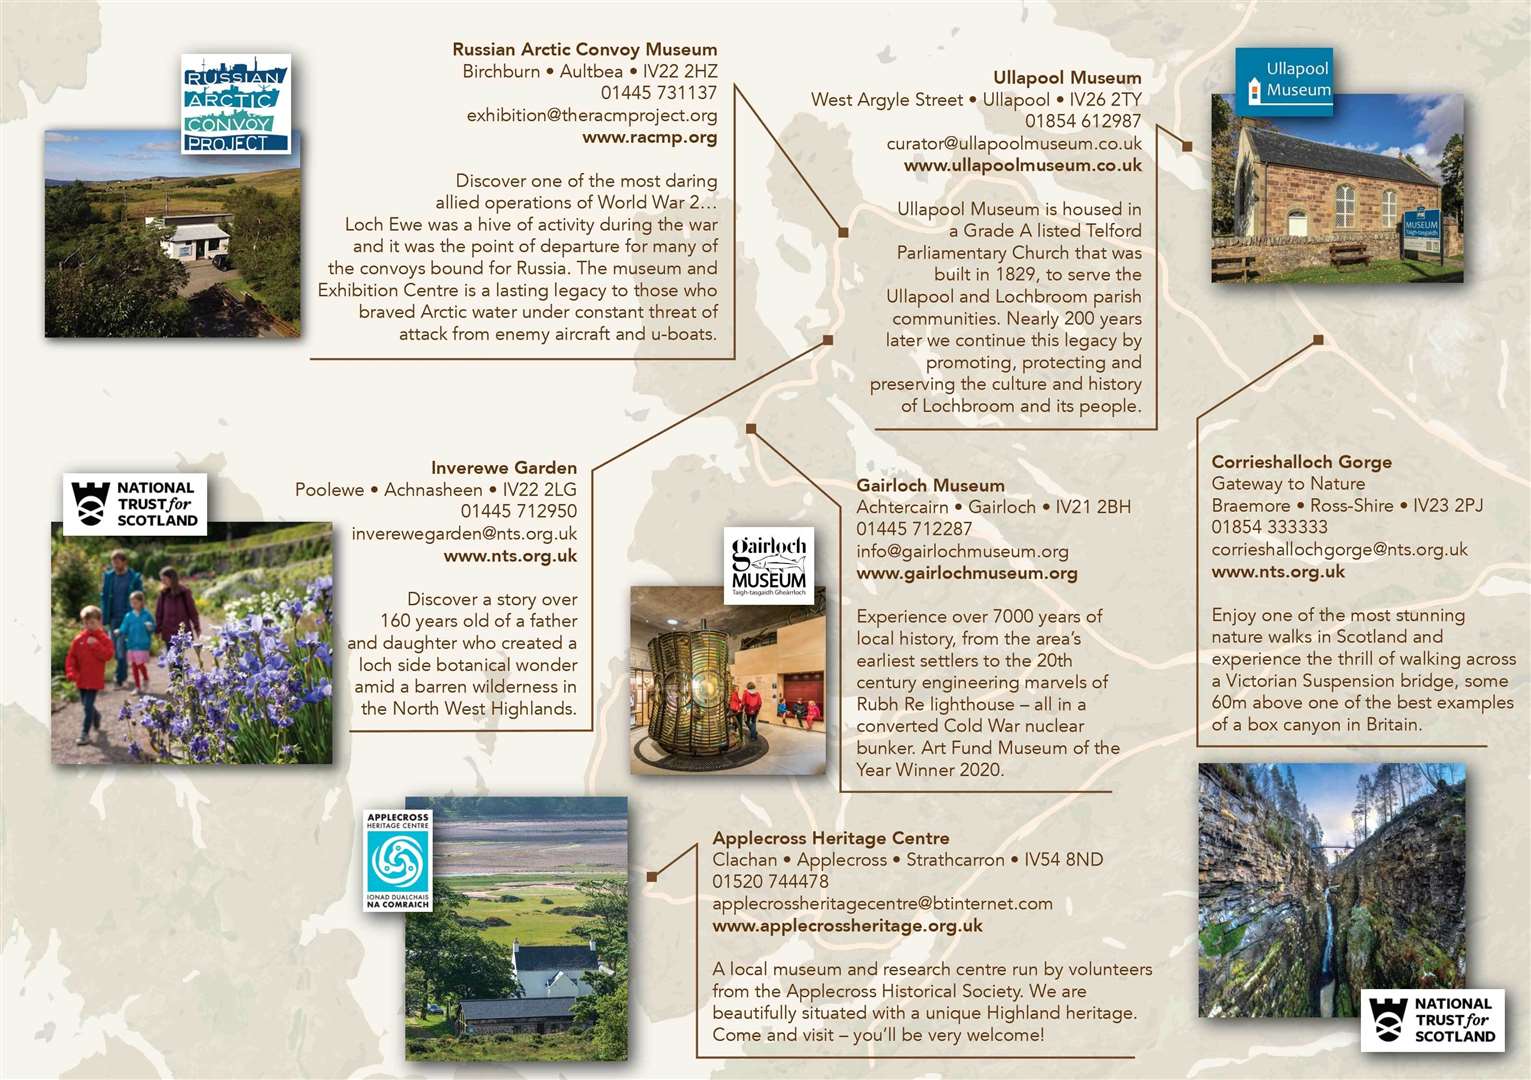 A promotional leaflet outlines the appeal of the visitor spots in a nutshell.